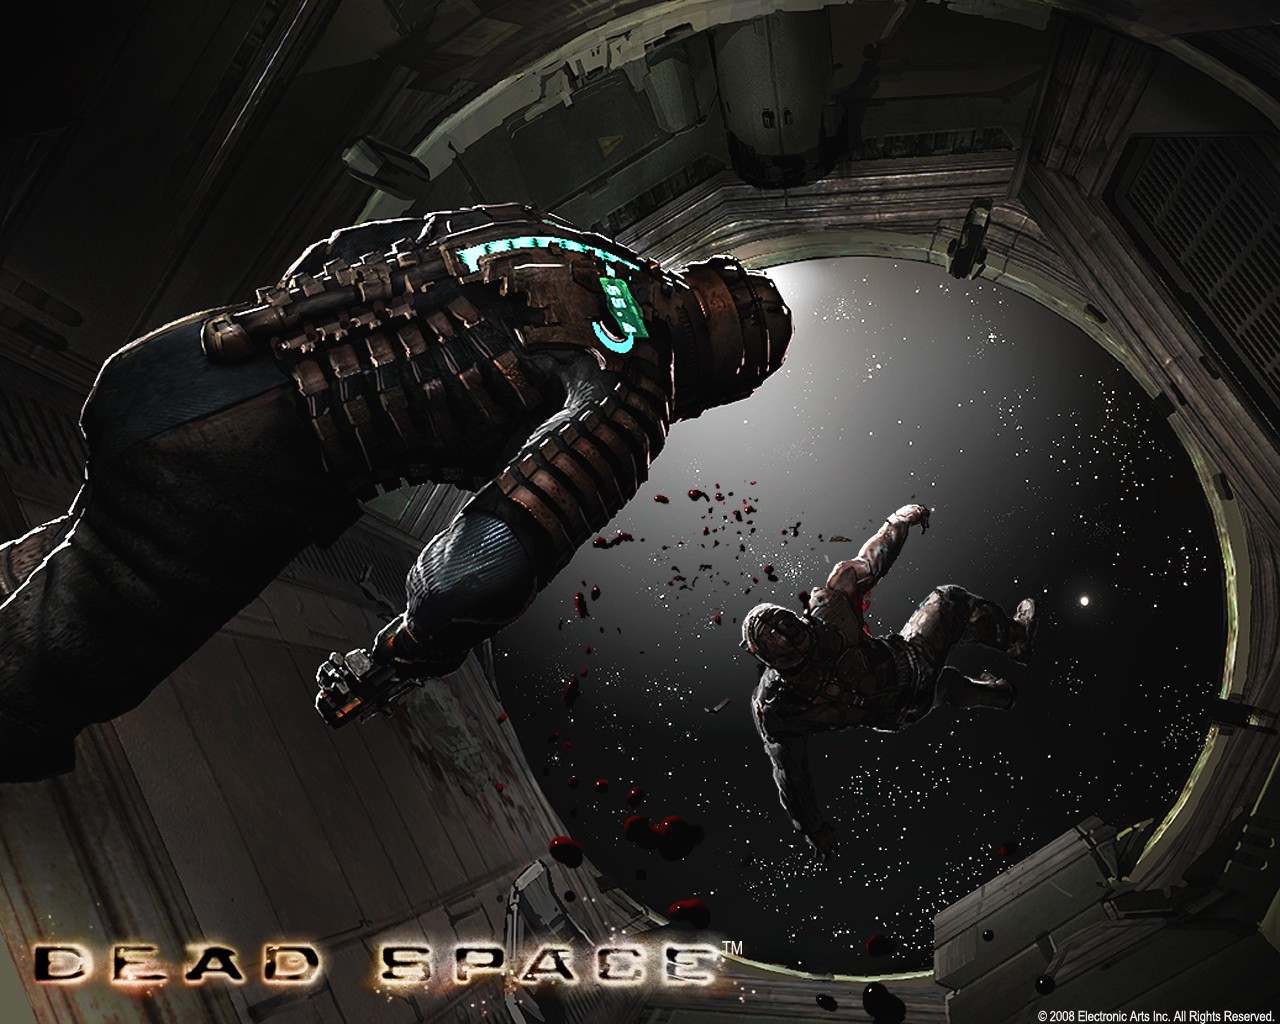 General 1280x1024 video games Dead Space Isaac Clarke 2008 (Year) science fiction video game art Video Game Horror blood